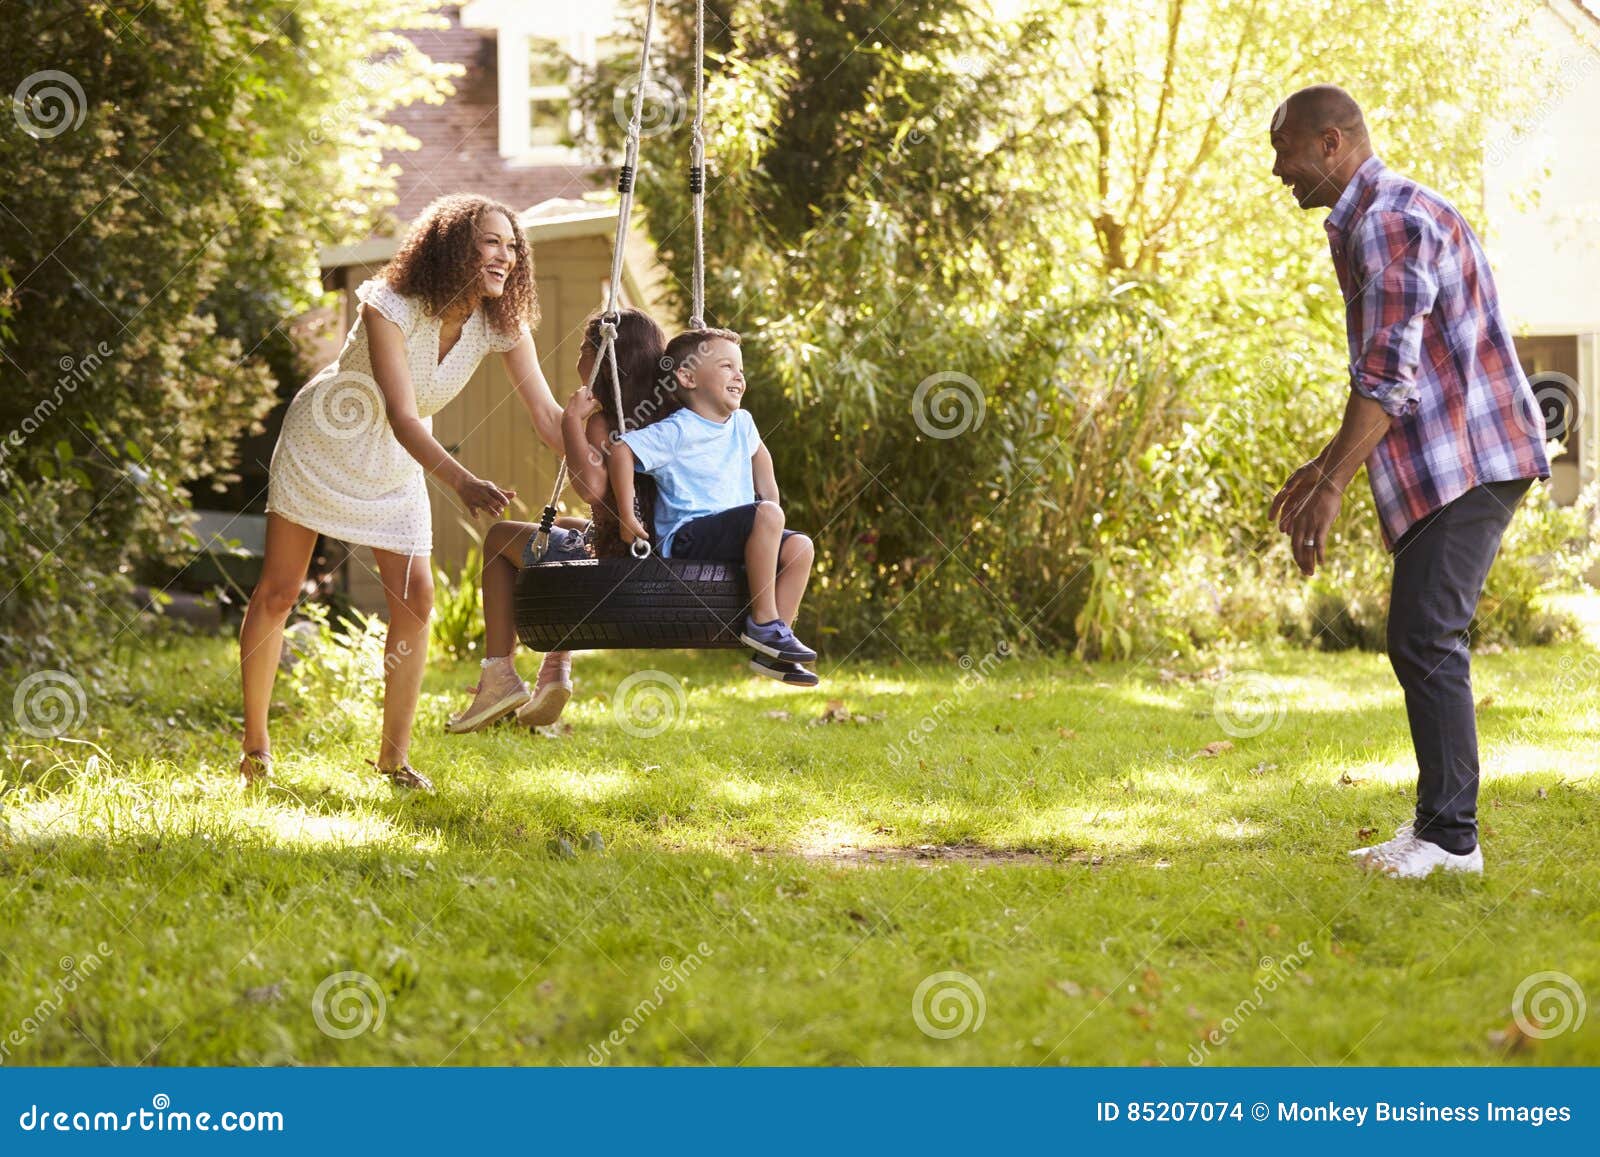 Parents Pushing Children on Tire Swing in Garden Stock Photo - Image of ...